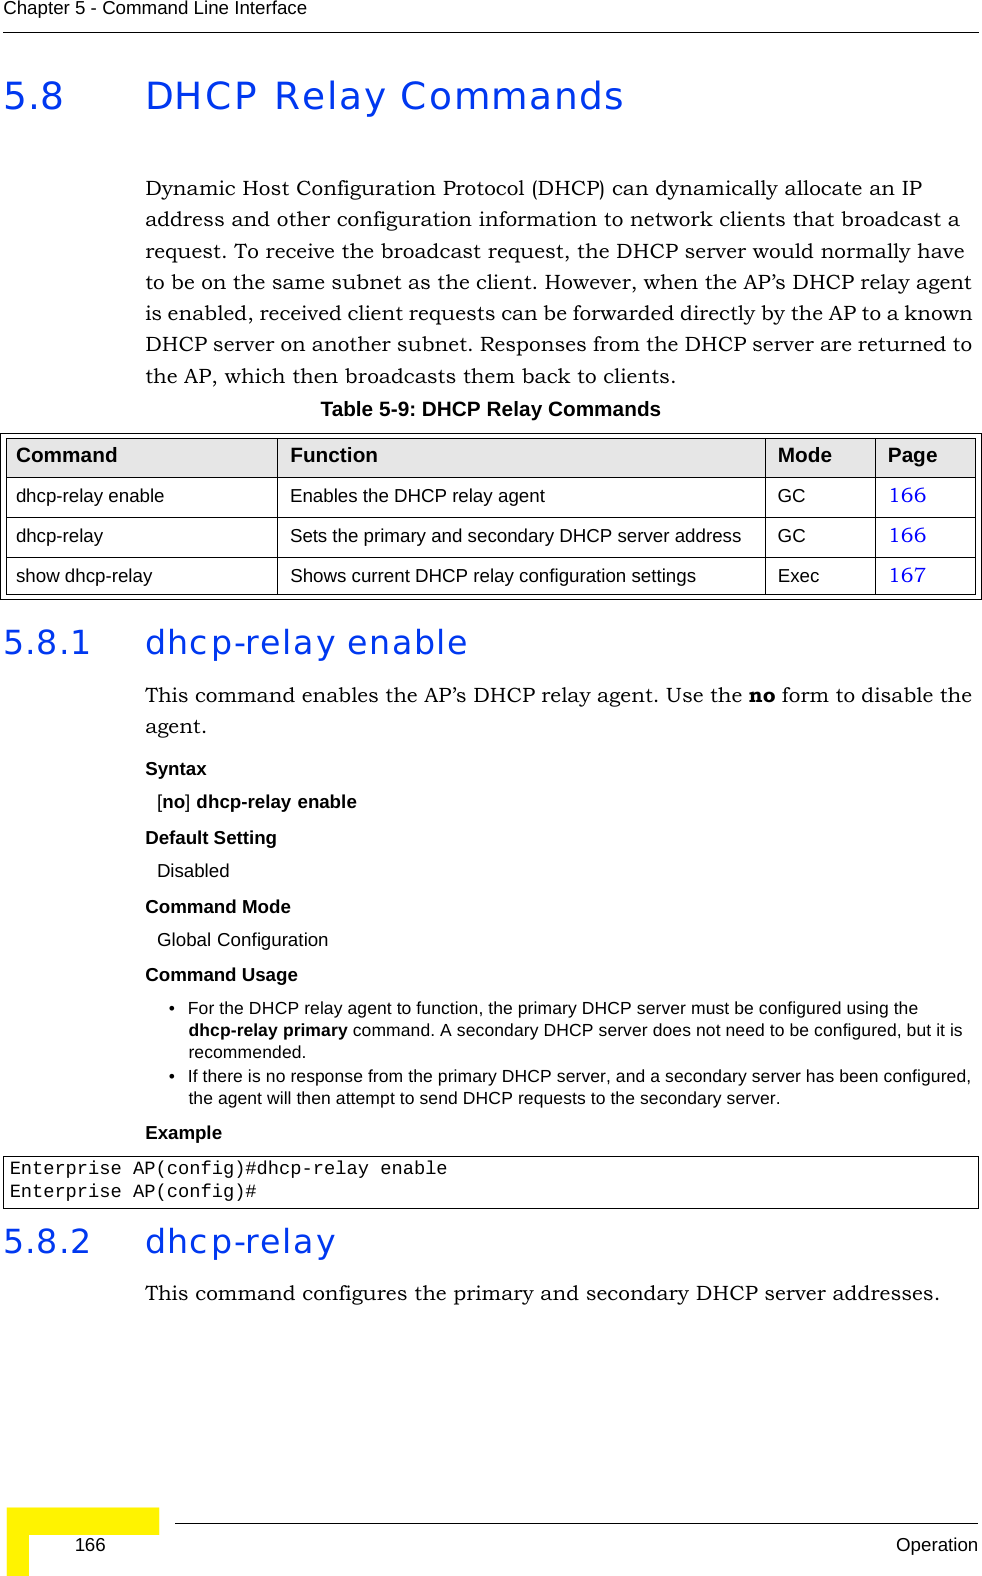  166 OperationChapter 5 - Command Line Interface5.8 DHCP Relay CommandsDynamic Host Configuration Protocol (DHCP) can dynamically allocate an IP address and other configuration information to network clients that broadcast a request. To receive the broadcast request, the DHCP server would normally have to be on the same subnet as the client. However, when the AP’s DHCP relay agent is enabled, received client requests can be forwarded directly by the AP to a known DHCP server on another subnet. Responses from the DHCP server are returned to the AP, which then broadcasts them back to clients.5.8.1 dhcp-relay enableThis command enables the AP’s DHCP relay agent. Use the no form to disable the agent.Syntax[no] dhcp-relay enableDefault Setting DisabledCommand Mode Global ConfigurationCommand Usage • For the DHCP relay agent to function, the primary DHCP server must be configured using the dhcp-relay primary command. A secondary DHCP server does not need to be configured, but it is recommended.• If there is no response from the primary DHCP server, and a secondary server has been configured, the agent will then attempt to send DHCP requests to the secondary server.Example 5.8.2 dhcp-relayThis command configures the primary and secondary DHCP server addresses.Table 5-9: DHCP Relay CommandsCommand Function Mode Pagedhcp-relay enable Enables the DHCP relay agent GC 166dhcp-relay Sets the primary and secondary DHCP server address GC 166show dhcp-relay Shows current DHCP relay configuration settings Exec  167Enterprise AP(config)#dhcp-relay enableEnterprise AP(config)#